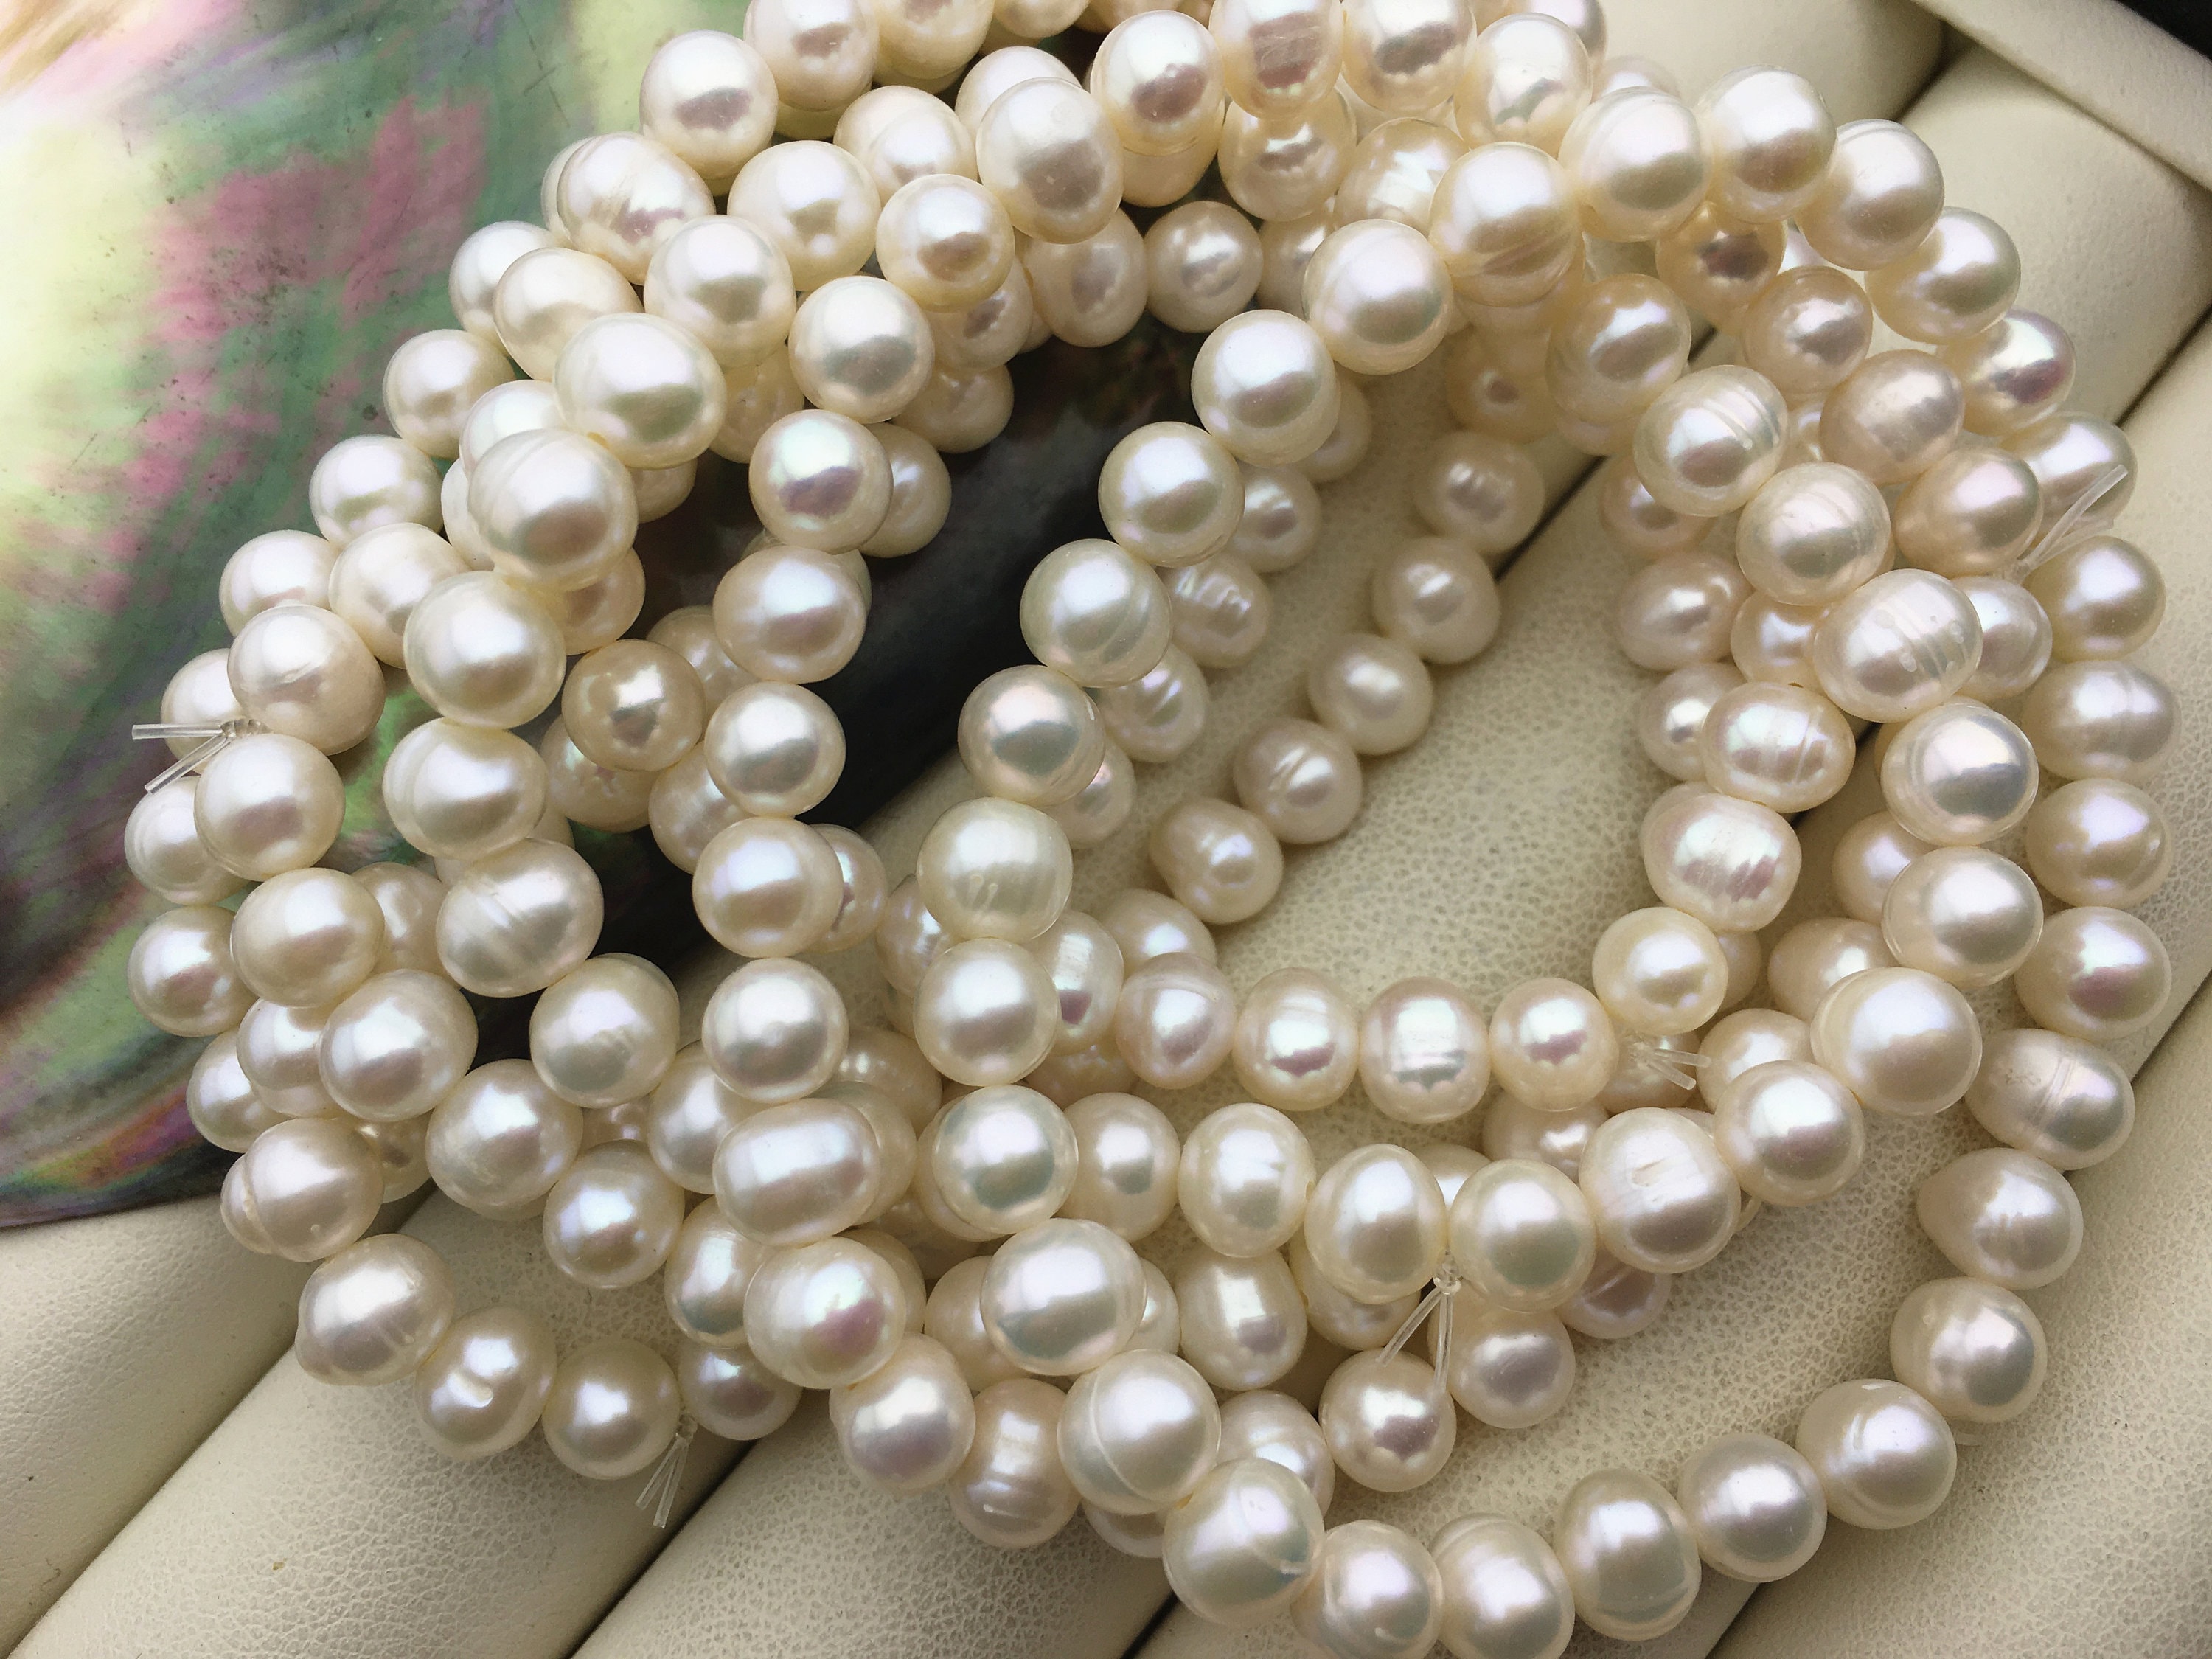 3-3.5mm Natural White Freshwater Pearl Beads Loose Half Drilled Hole Cabs  20 pcs